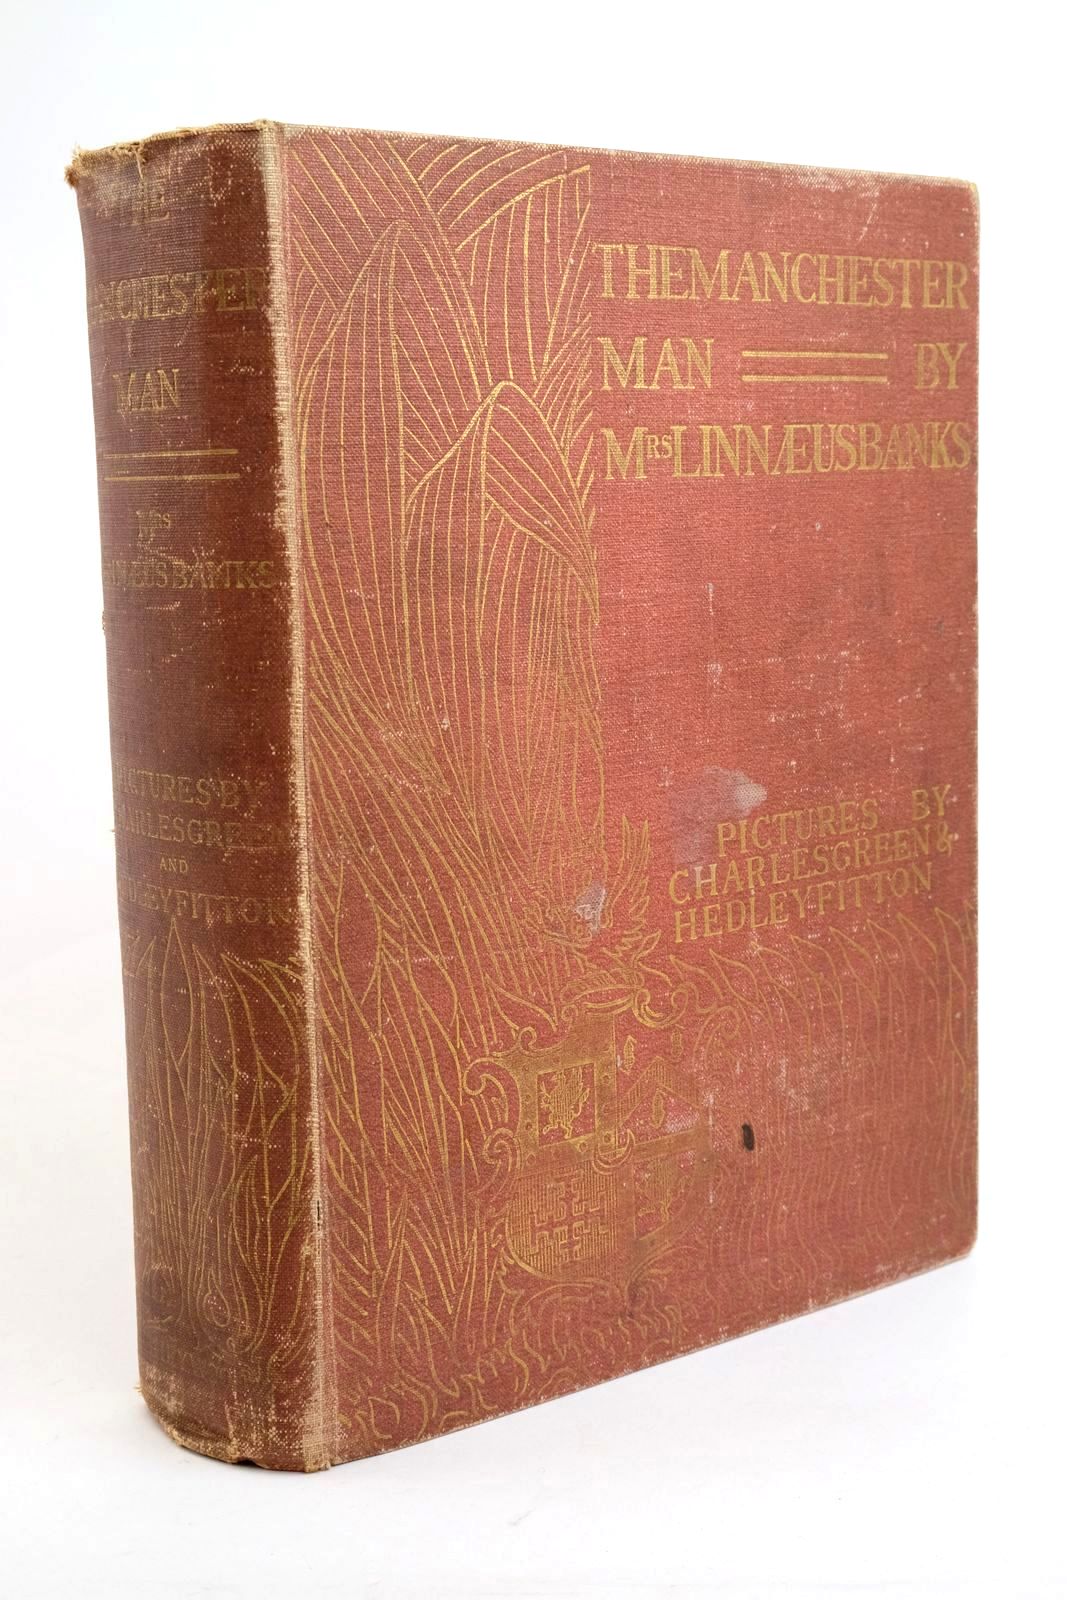 Photo of THE MANCHESTER MAN written by Banks, Isabella illustrated by Green, Charles
Fitton, Hedley published by Abel Heywood & Son Ltd. (STOCK CODE: 1322149)  for sale by Stella & Rose's Books